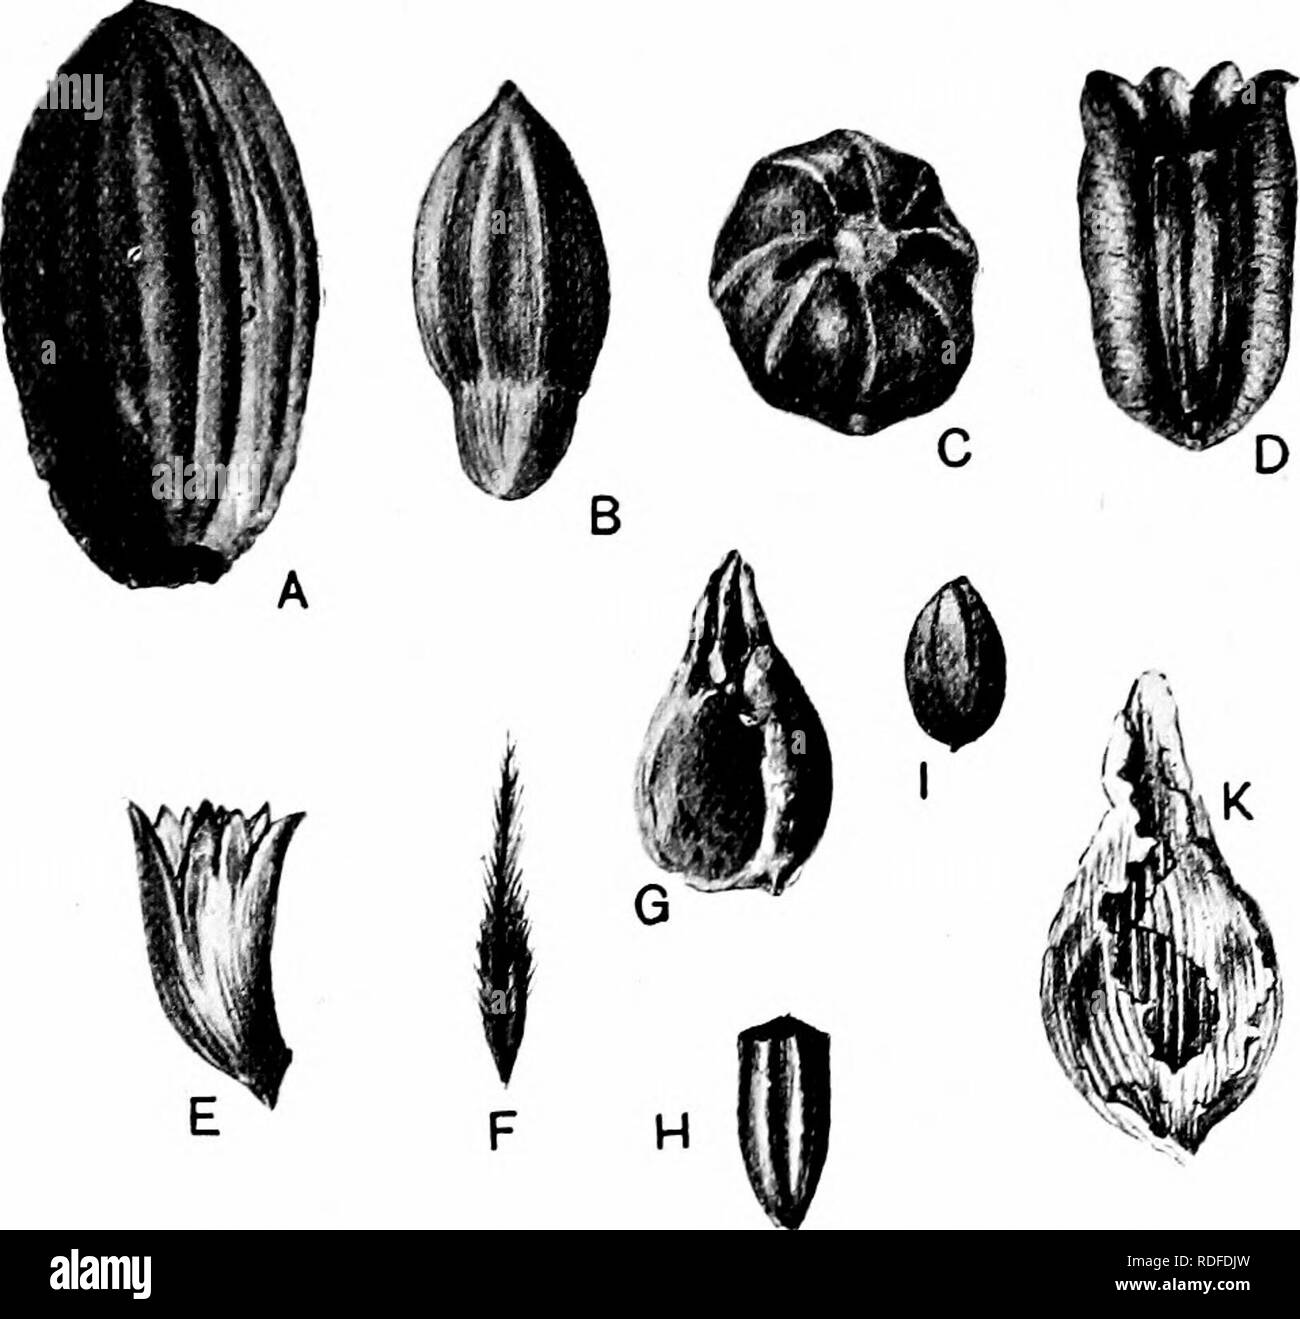 . Fossil plants : for students of botany and geology . Paleobotany. xxxv] RHYNCHOGOlSrnjM 359 flora of Spitzbergen Nathorst^ discusses the morphological nature of Rhynchogonium seeds and describes additional specimens. Without the aid of petrified examples it is hardly possible to determine the true nature of the fossils.. Fig. 506. A, Holcospermum sulcatum. B, C, Codonospermum anomalum. D, Diplopterotesta spitzbergeneis (x 3). E, Gnetopsis eUiptica (oupule). F, Thysanotesta sagittula. G, Rhynchogonium costatum. H, Hexagonocarpus Noeggerathi. I, Boroviczia Karpinskii. K, Rhabdoapermum tunicatu Stock Photo